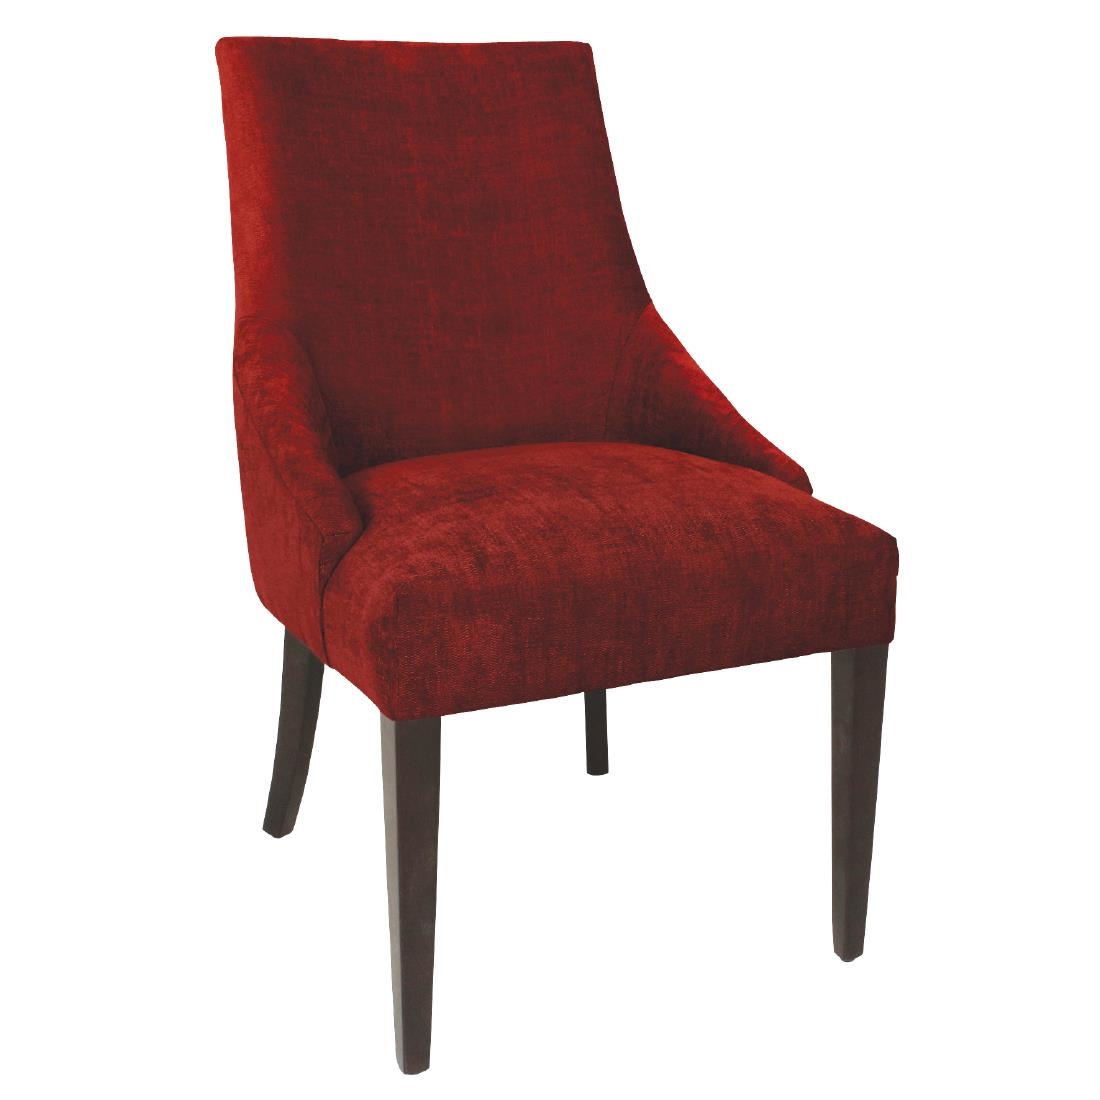 Finesse Dining Chair - Red